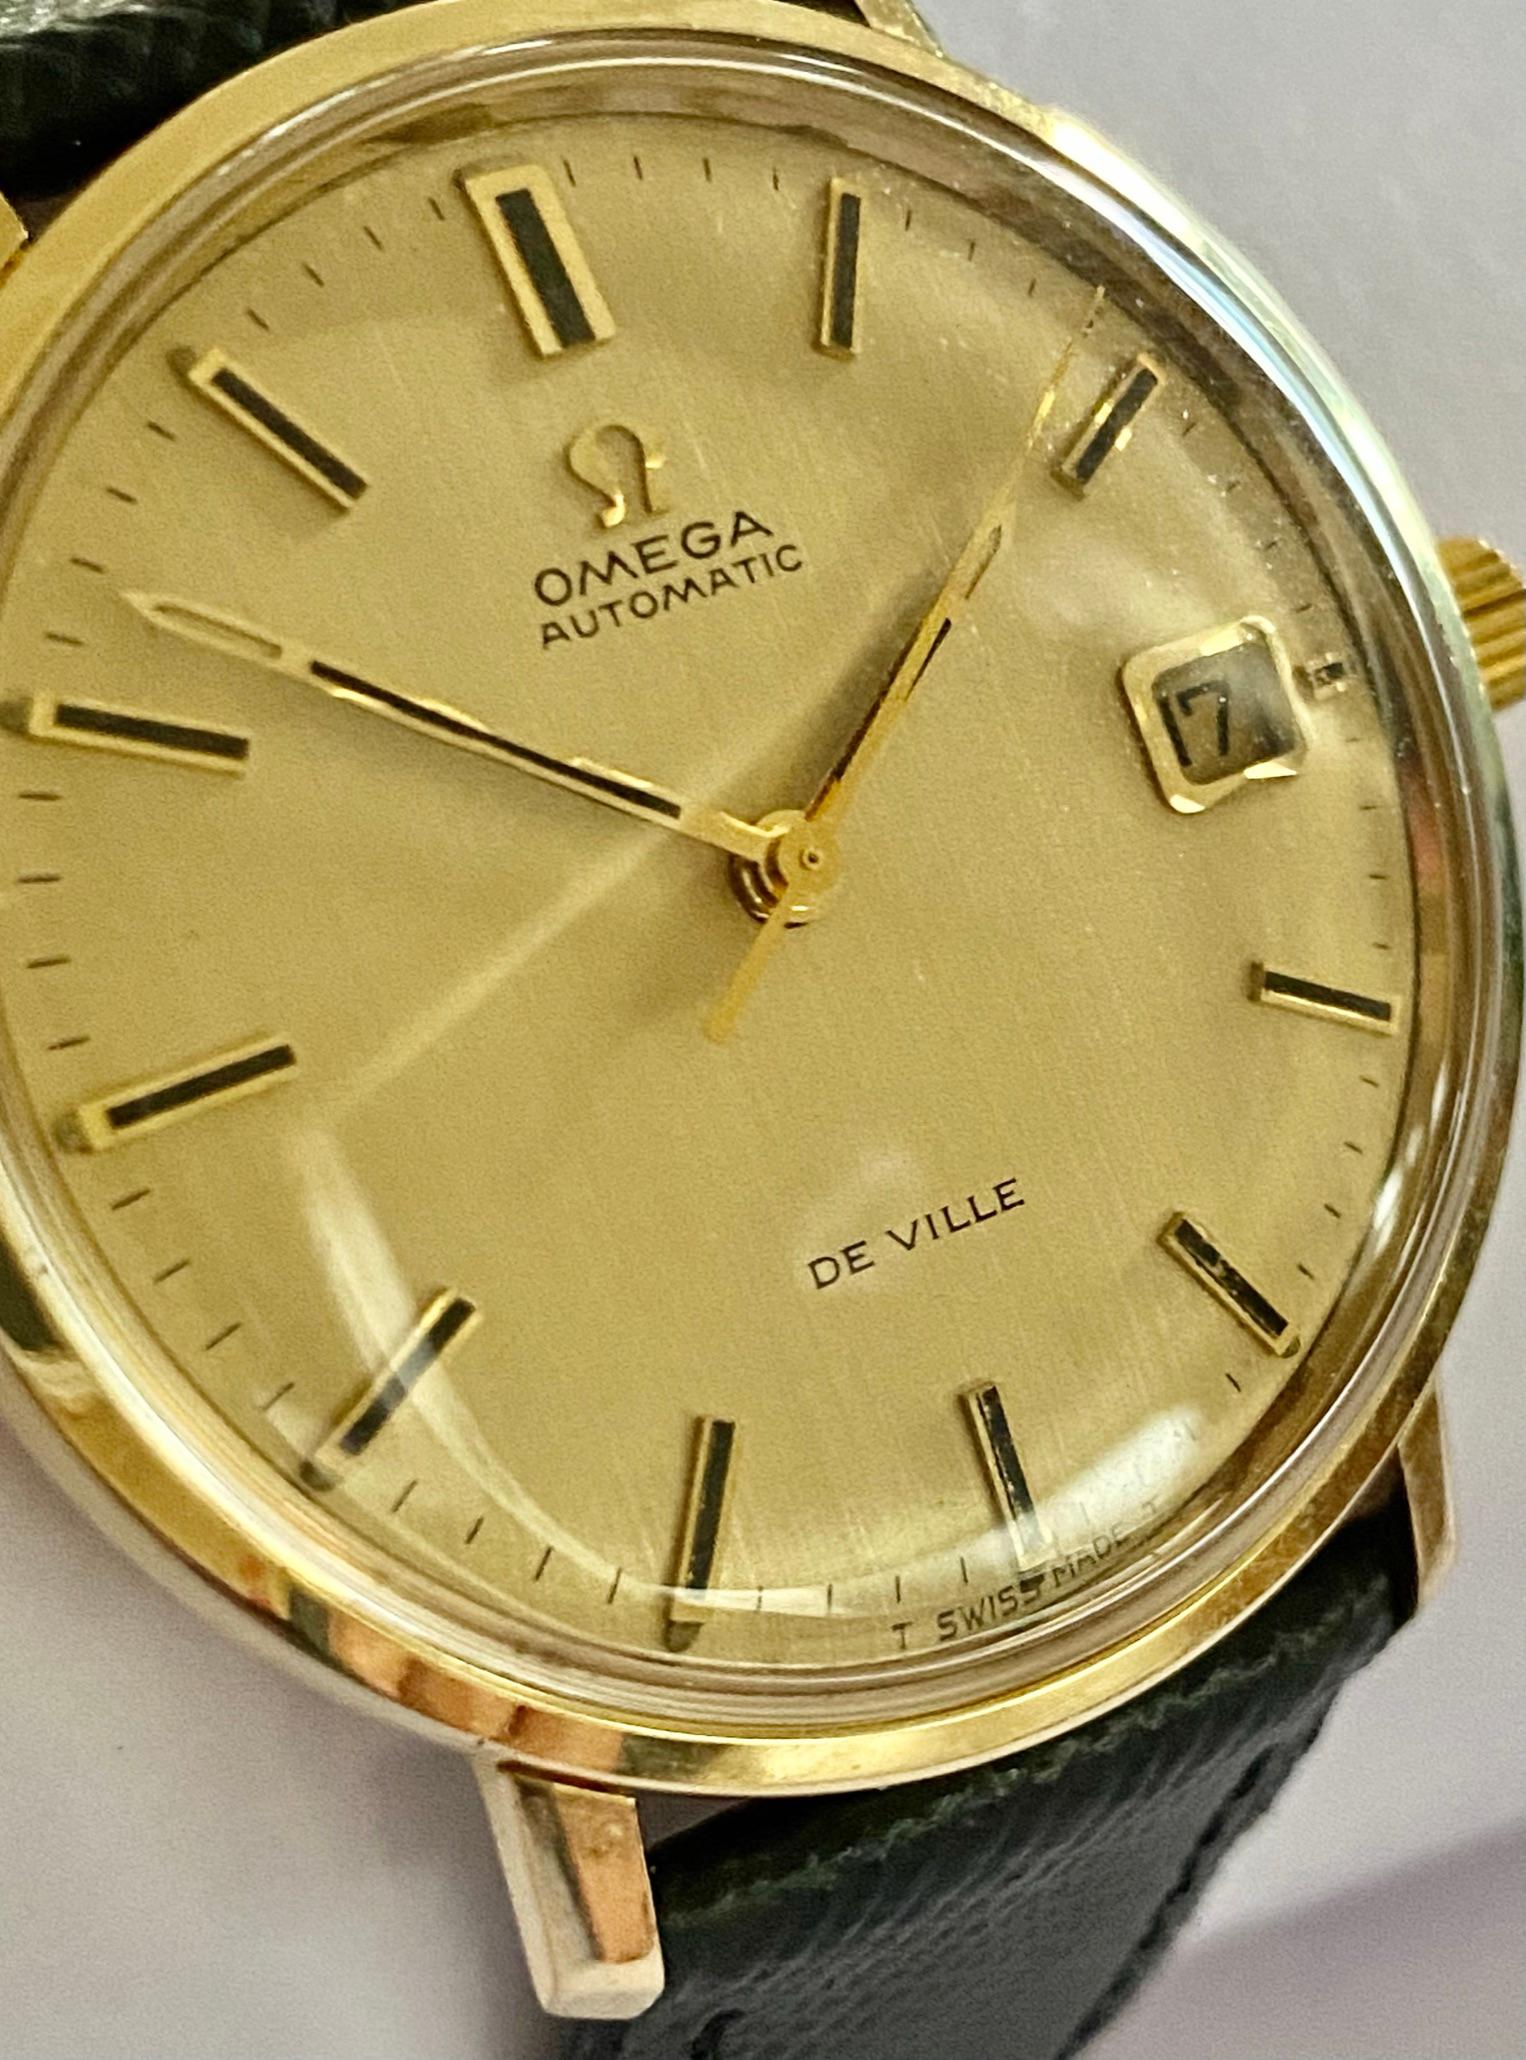 One (1) 14K. Yellow Gold Watch, Automatic Mouvement with Date
Brand: Omega, Line: De Ville  watch nr: BD 166.033
Mouvement nr: 32.963.899   Calibre: 565 ( automoatic, central seep-second hand, date)
Production:  april 17 1972
Sold in the Netherlands